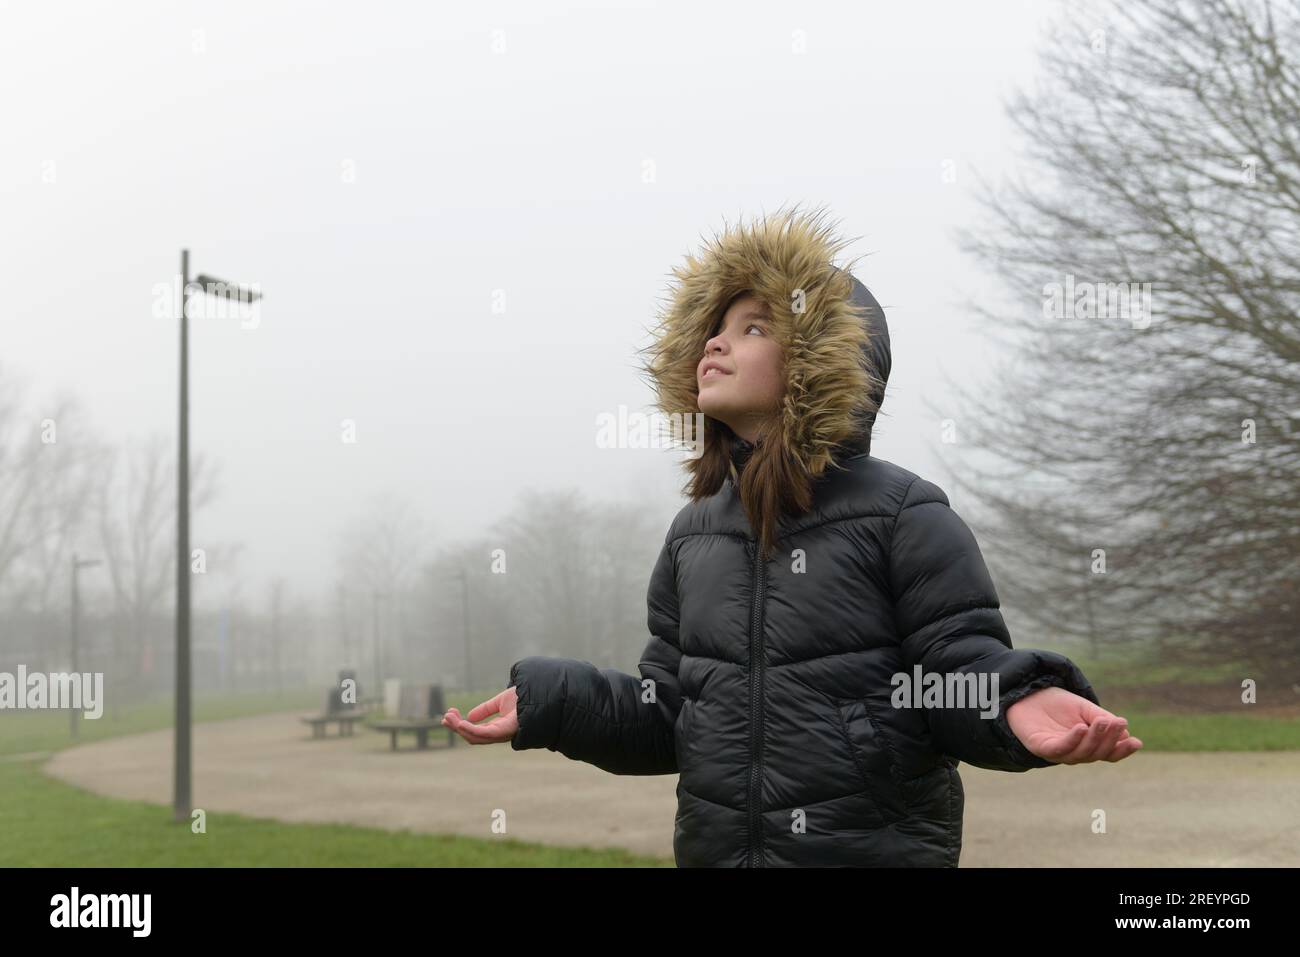 Waiting for snow. Portrait of a girl in cold weather in a warm jacket with a fur hood. Place for text Stock Photo